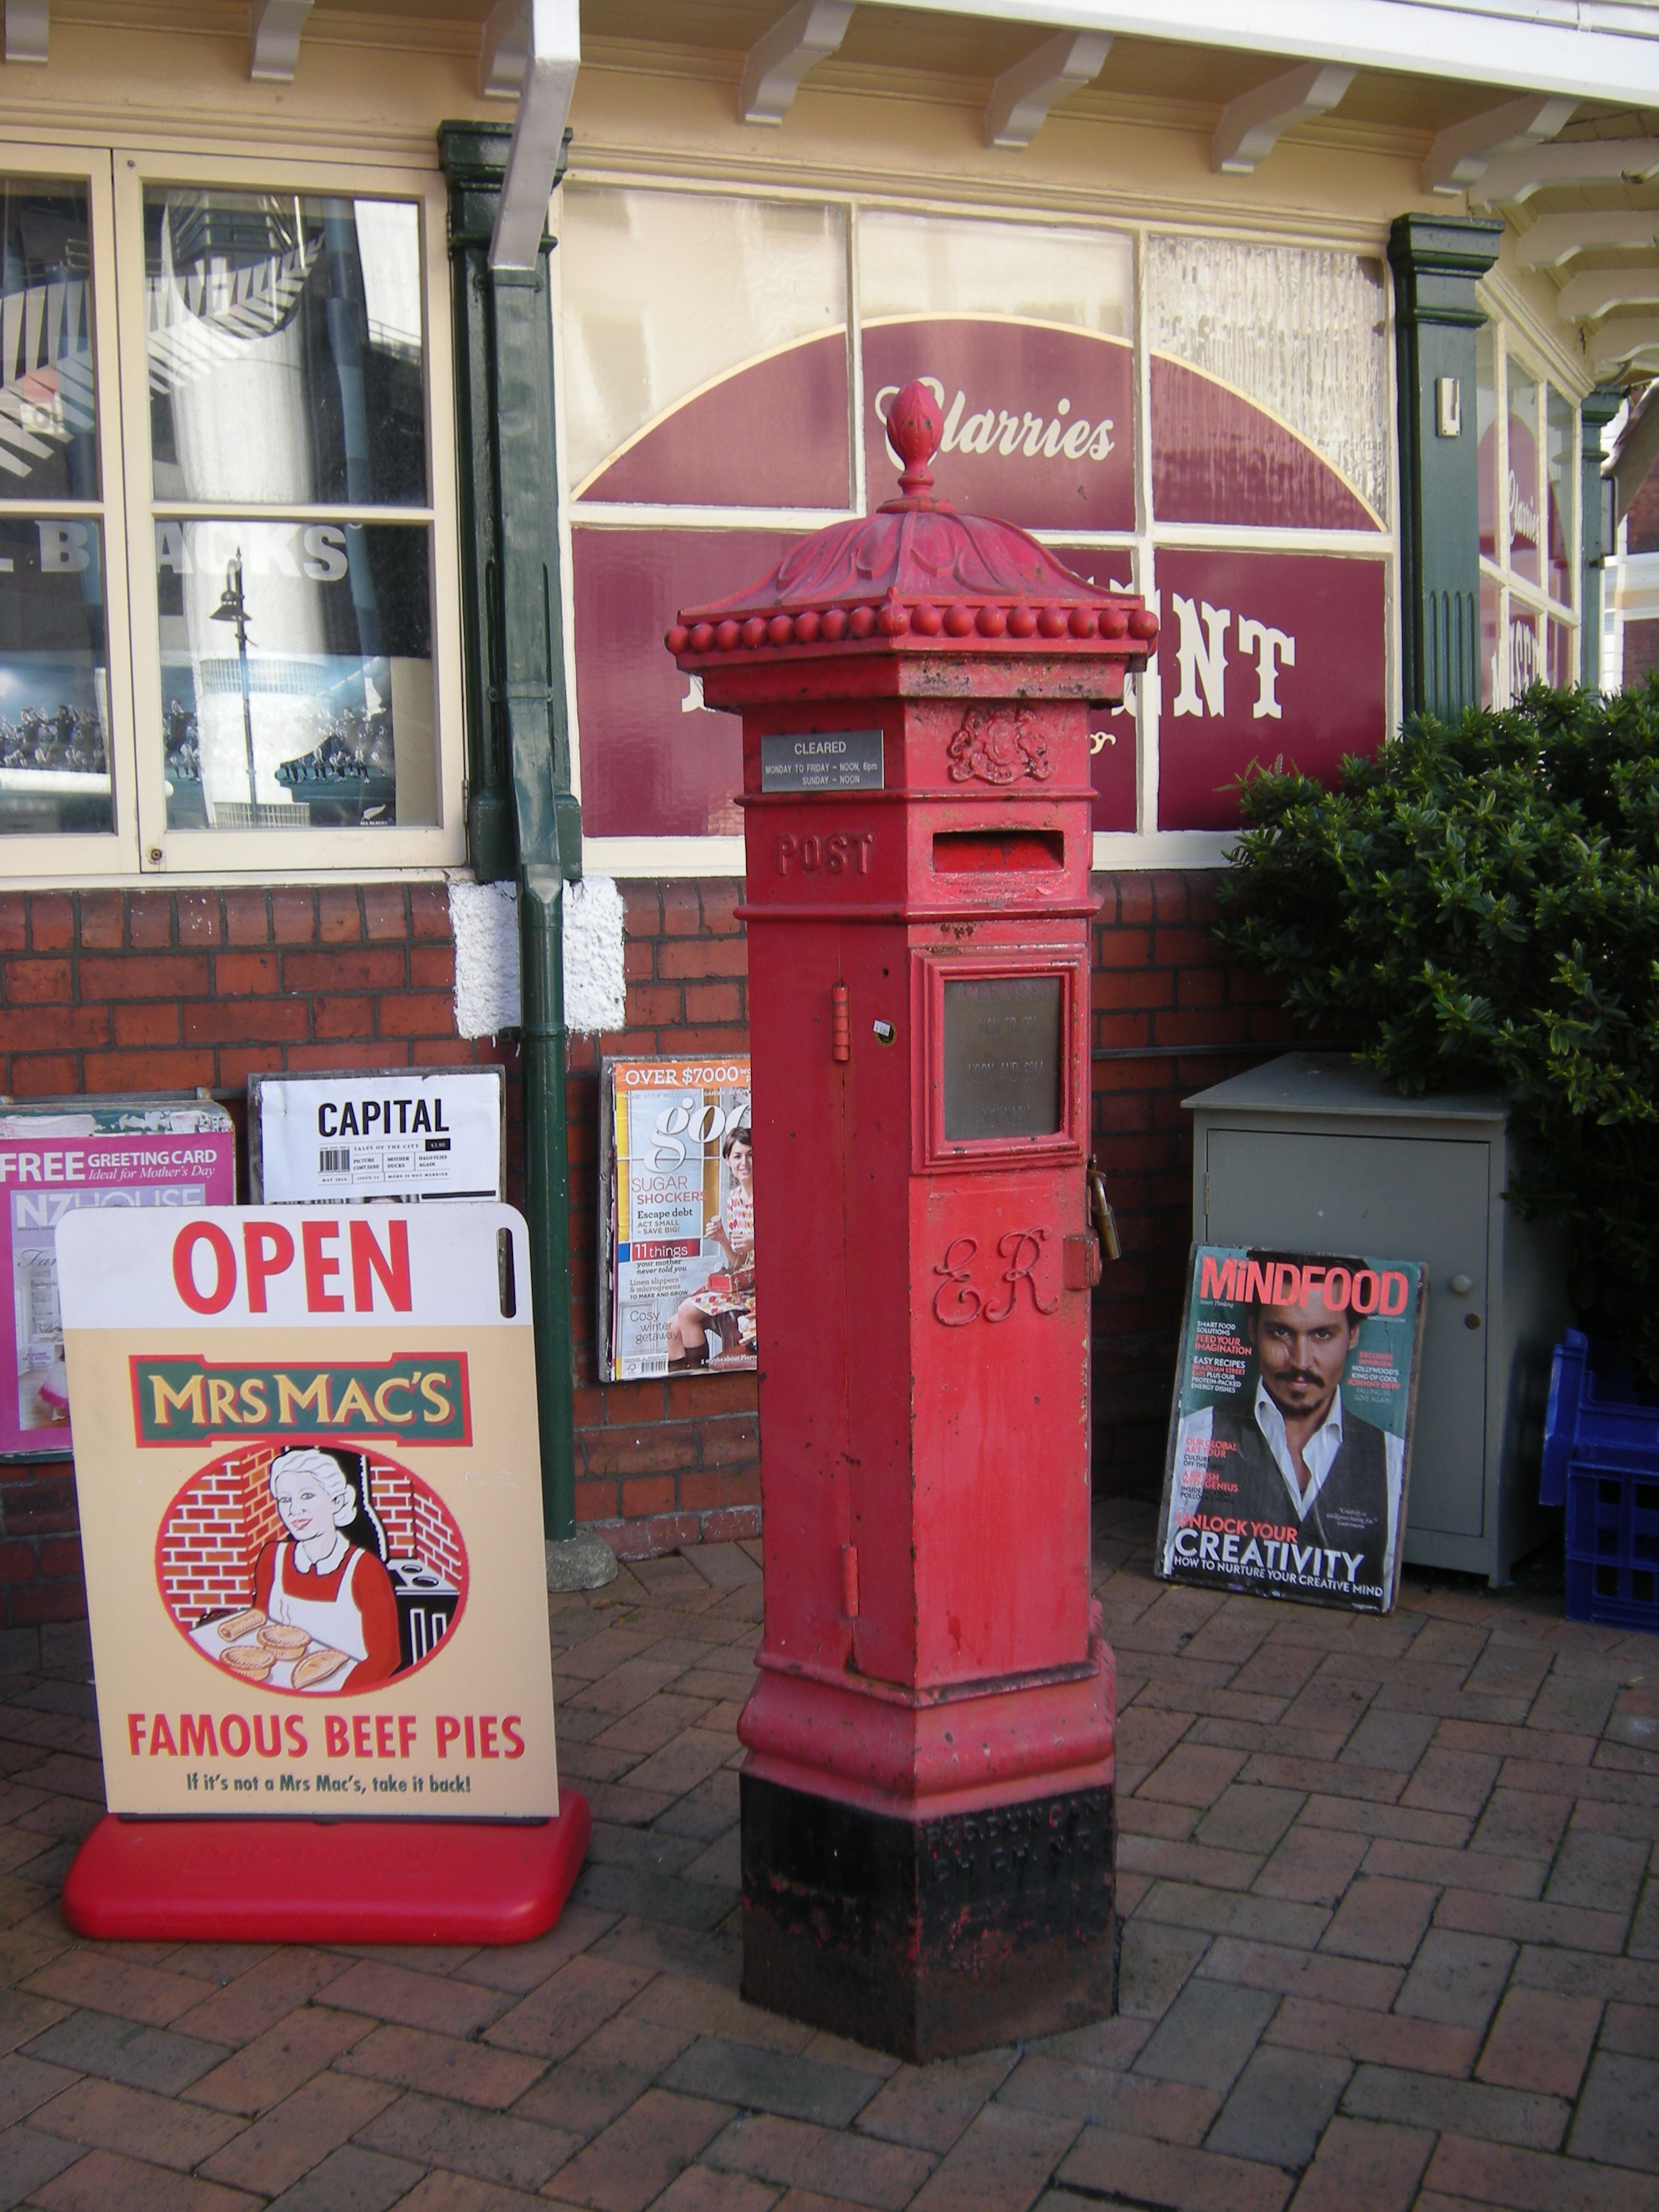 Post Office Square post box (Image: WCC, 2014)